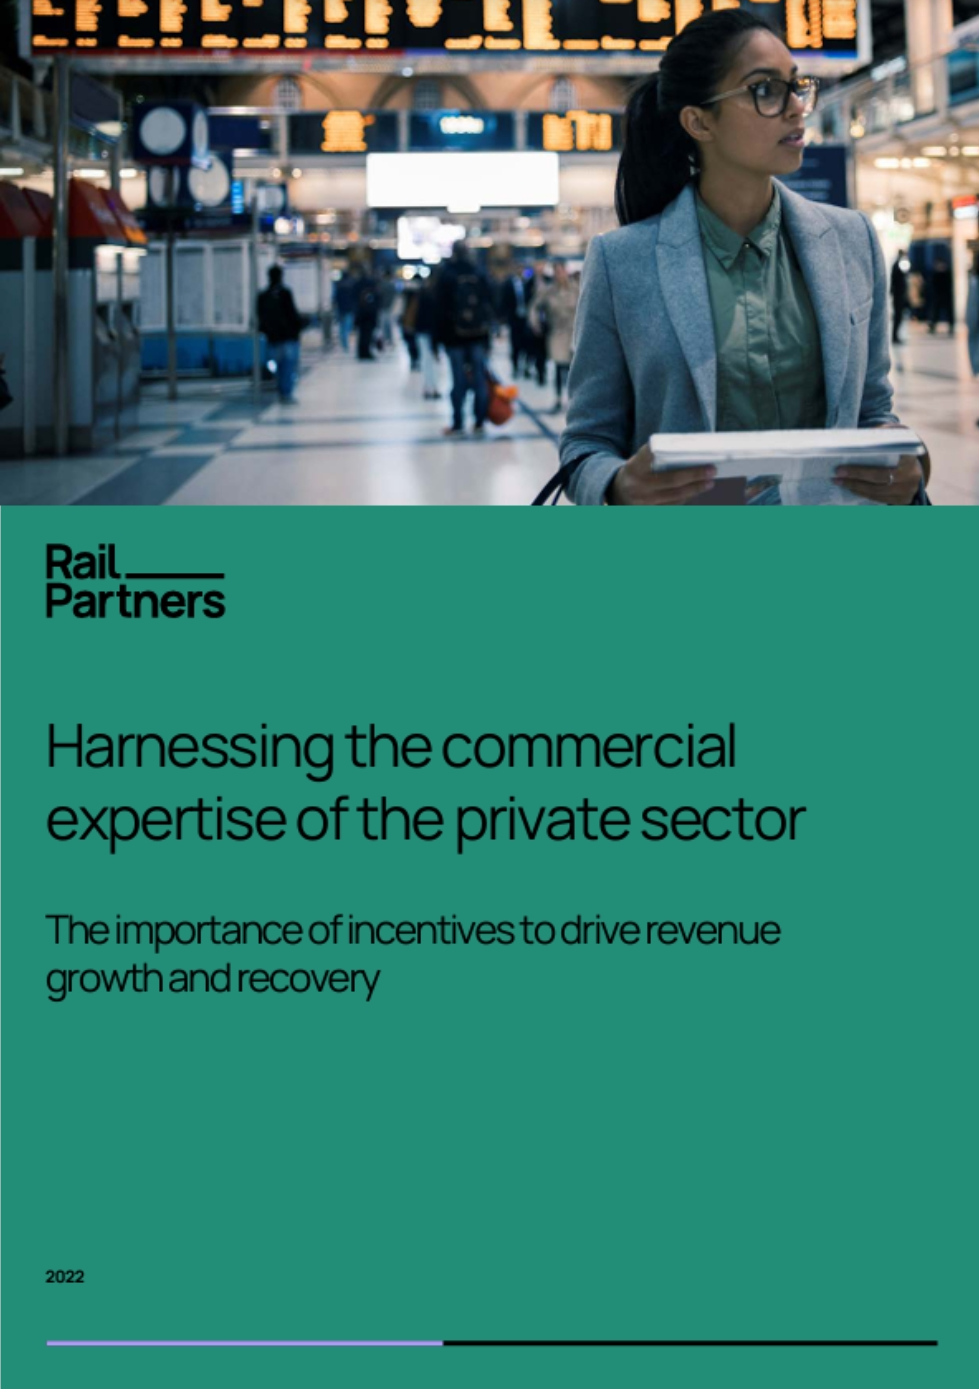 Harnessing the commercial expertise of the private sector